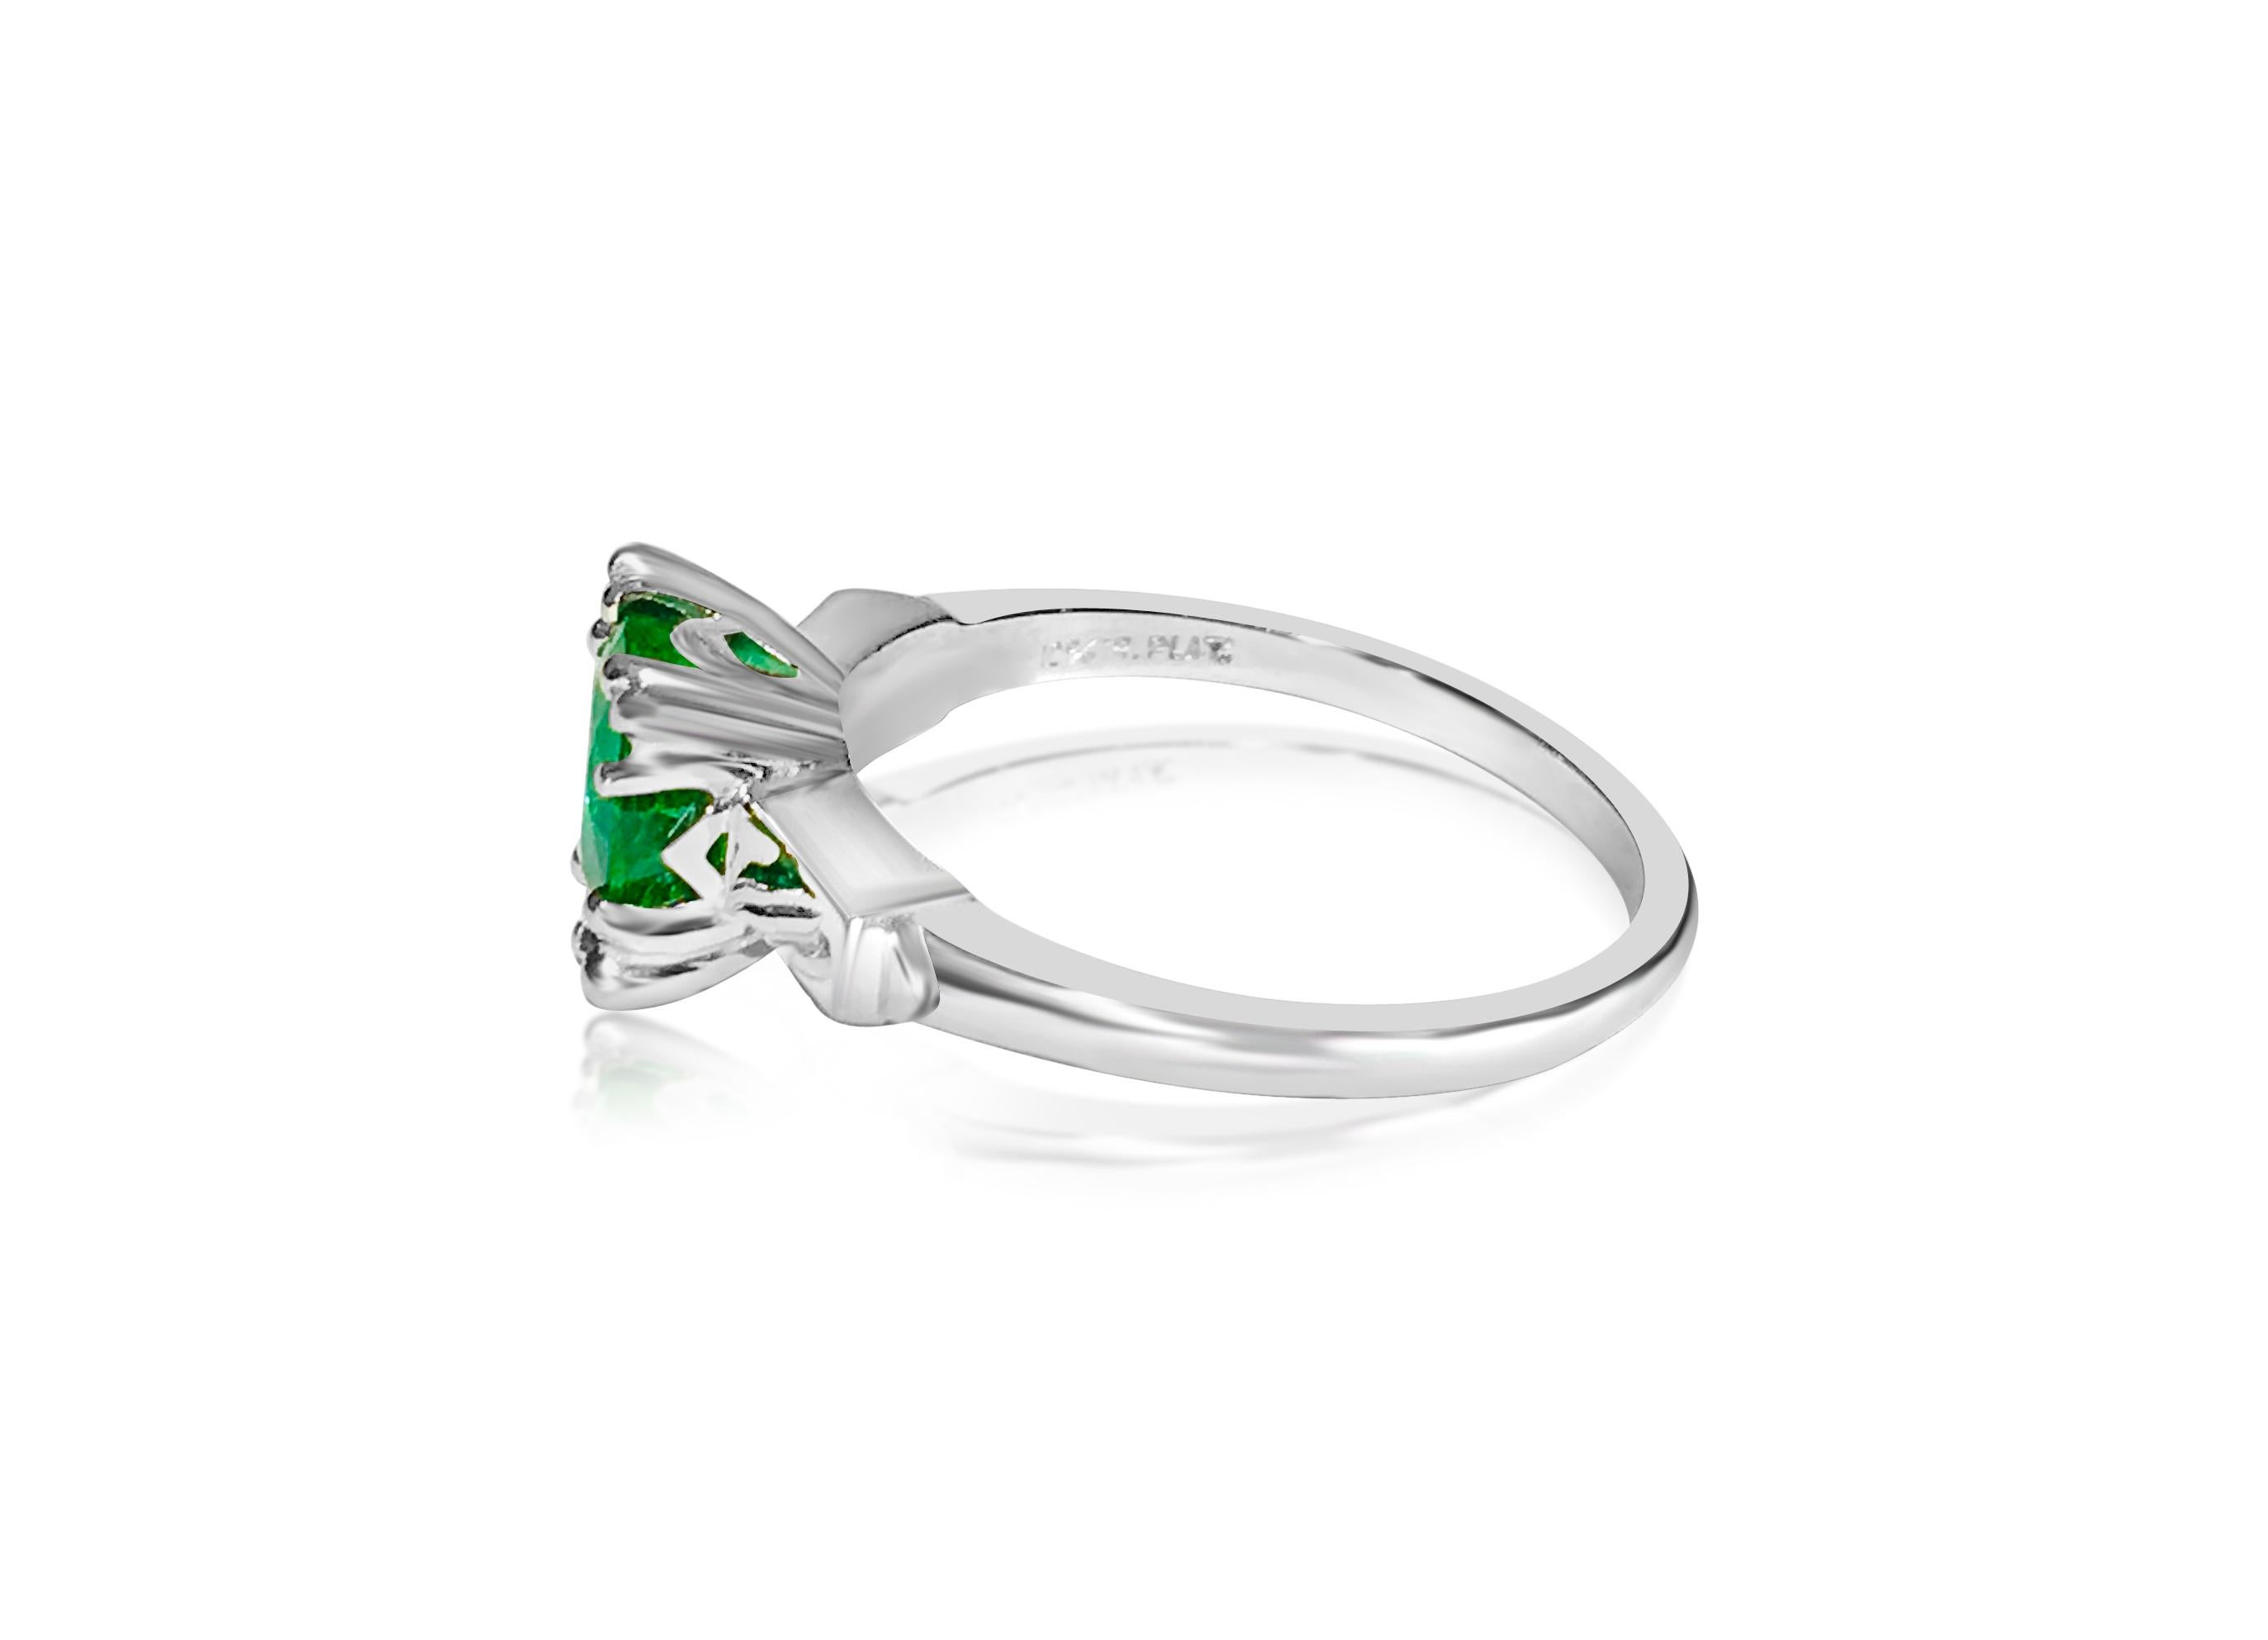 Round Cut GIA Certified Solitaire 2.00 Carat Emerald Platinum Wedding Ring For Sale